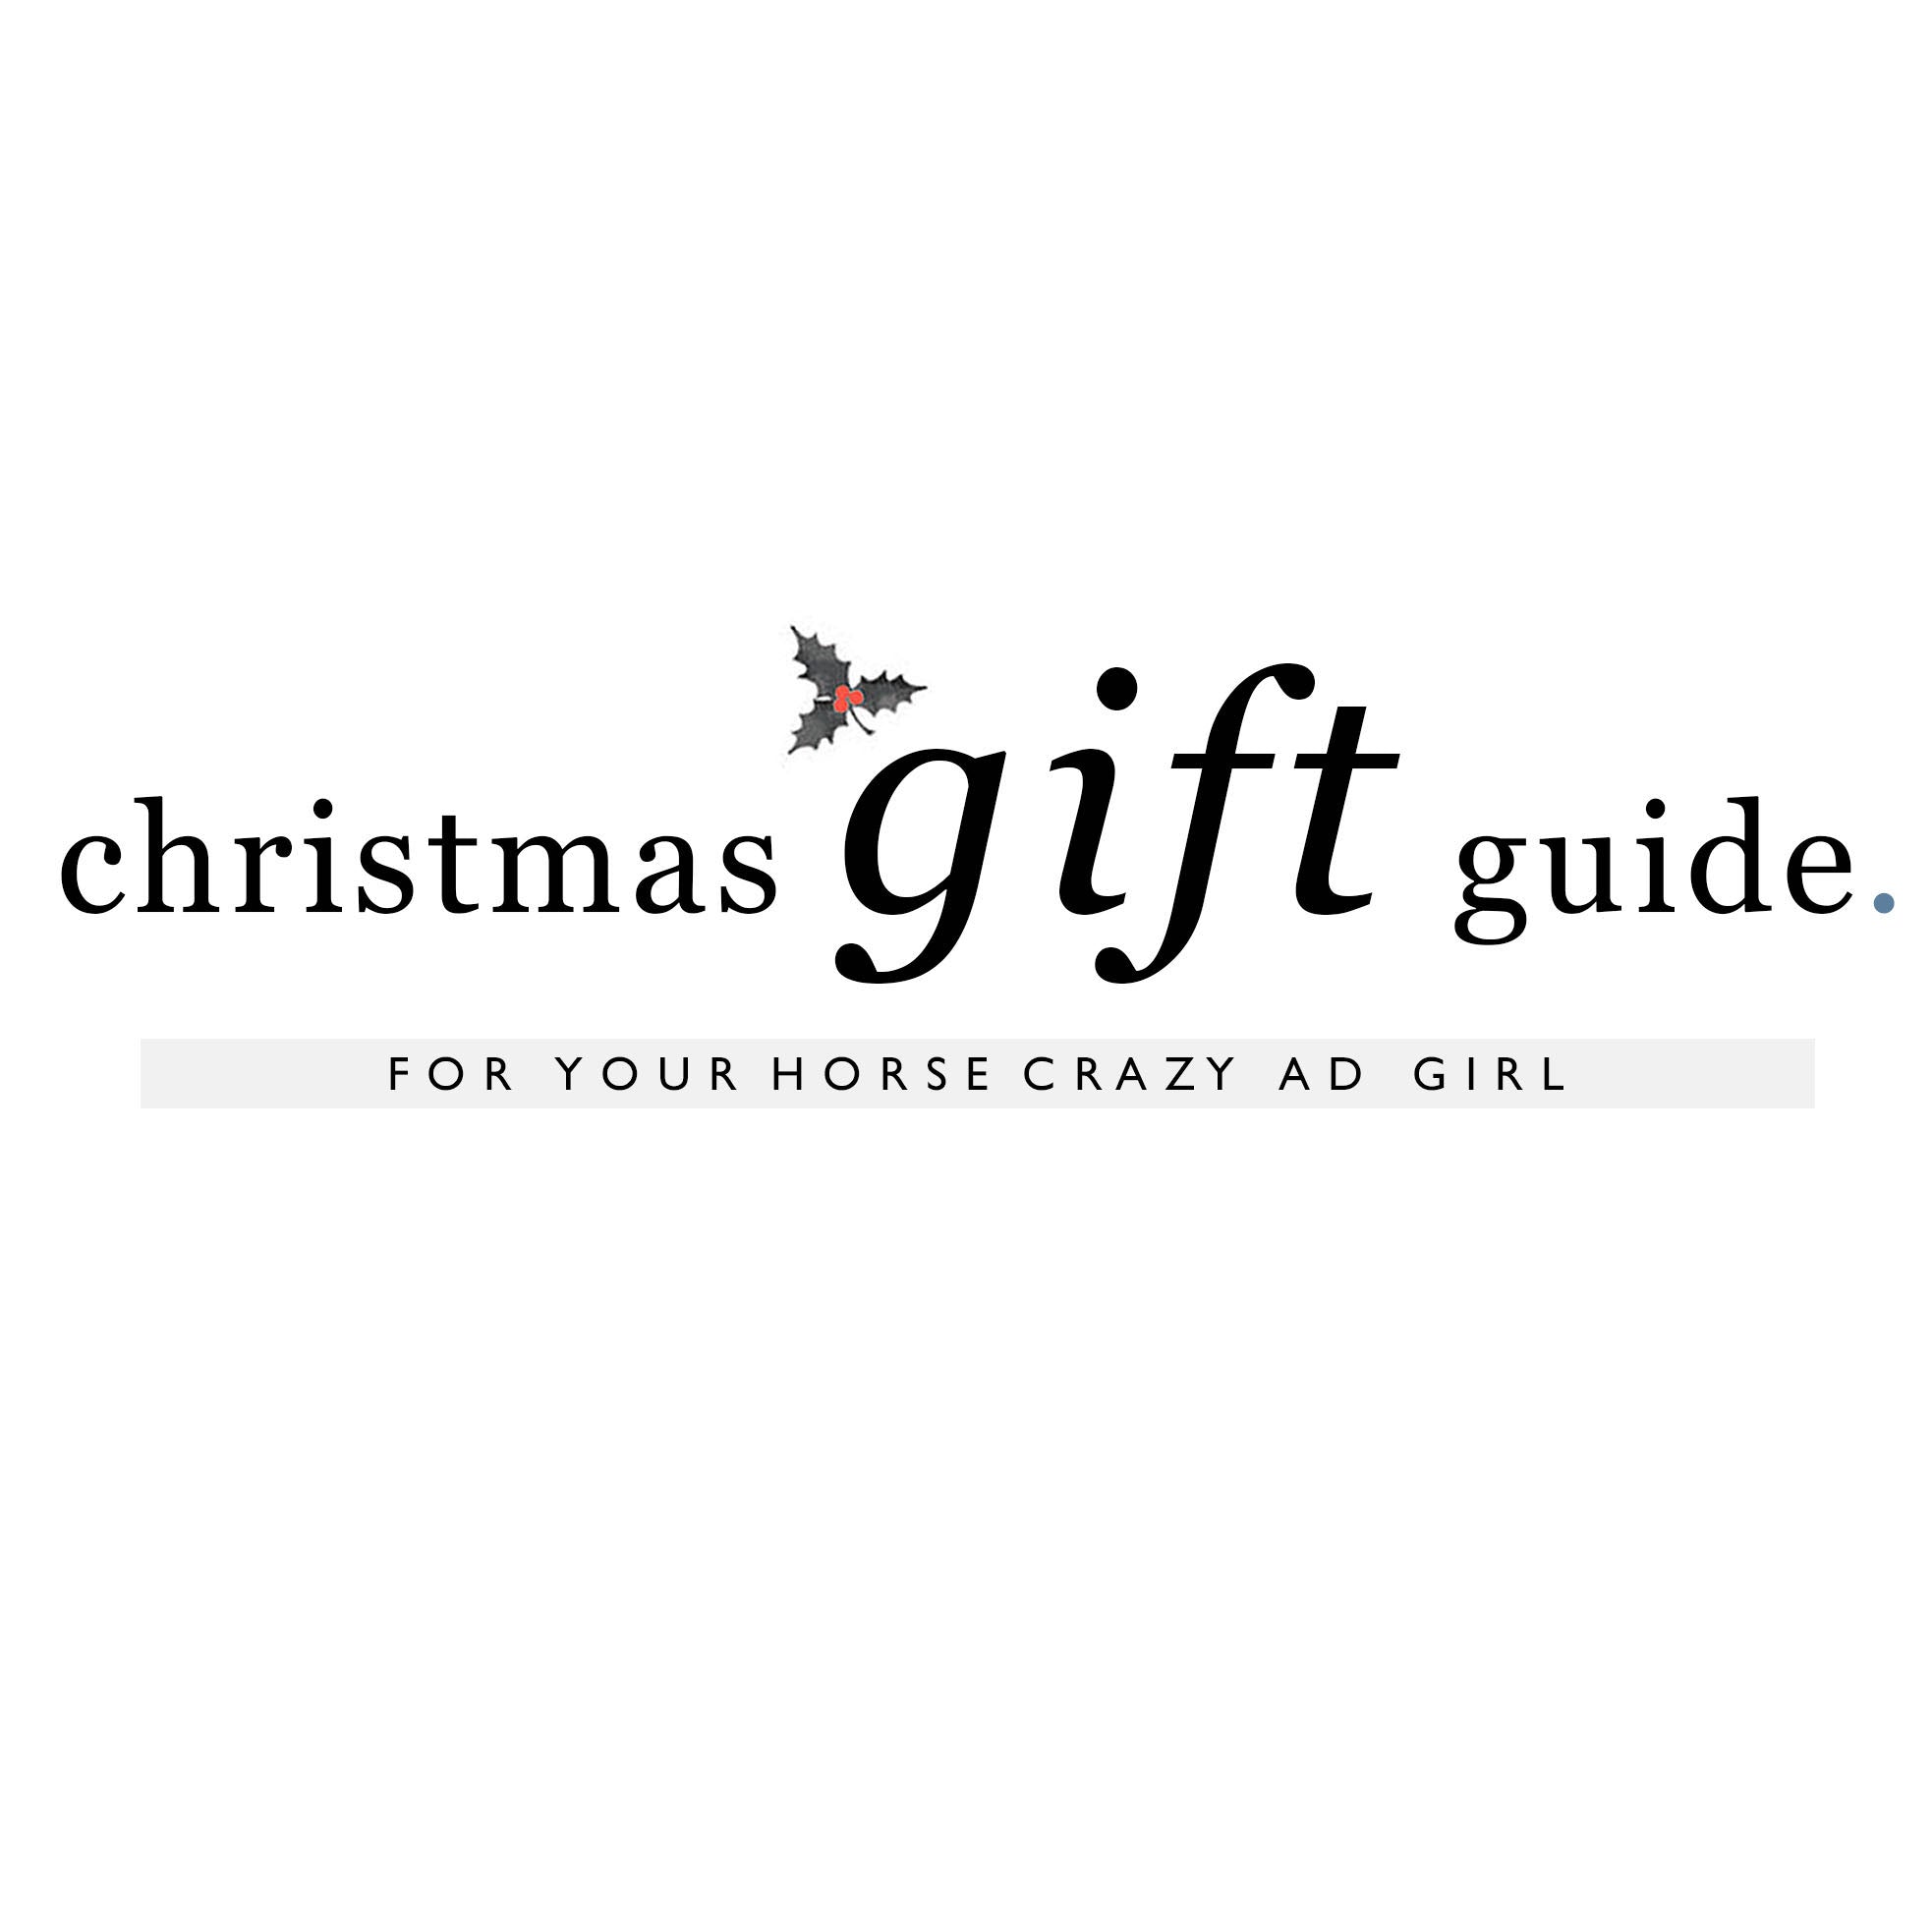 Christmas gift guide, a range of perfect gifts for an AD girl!